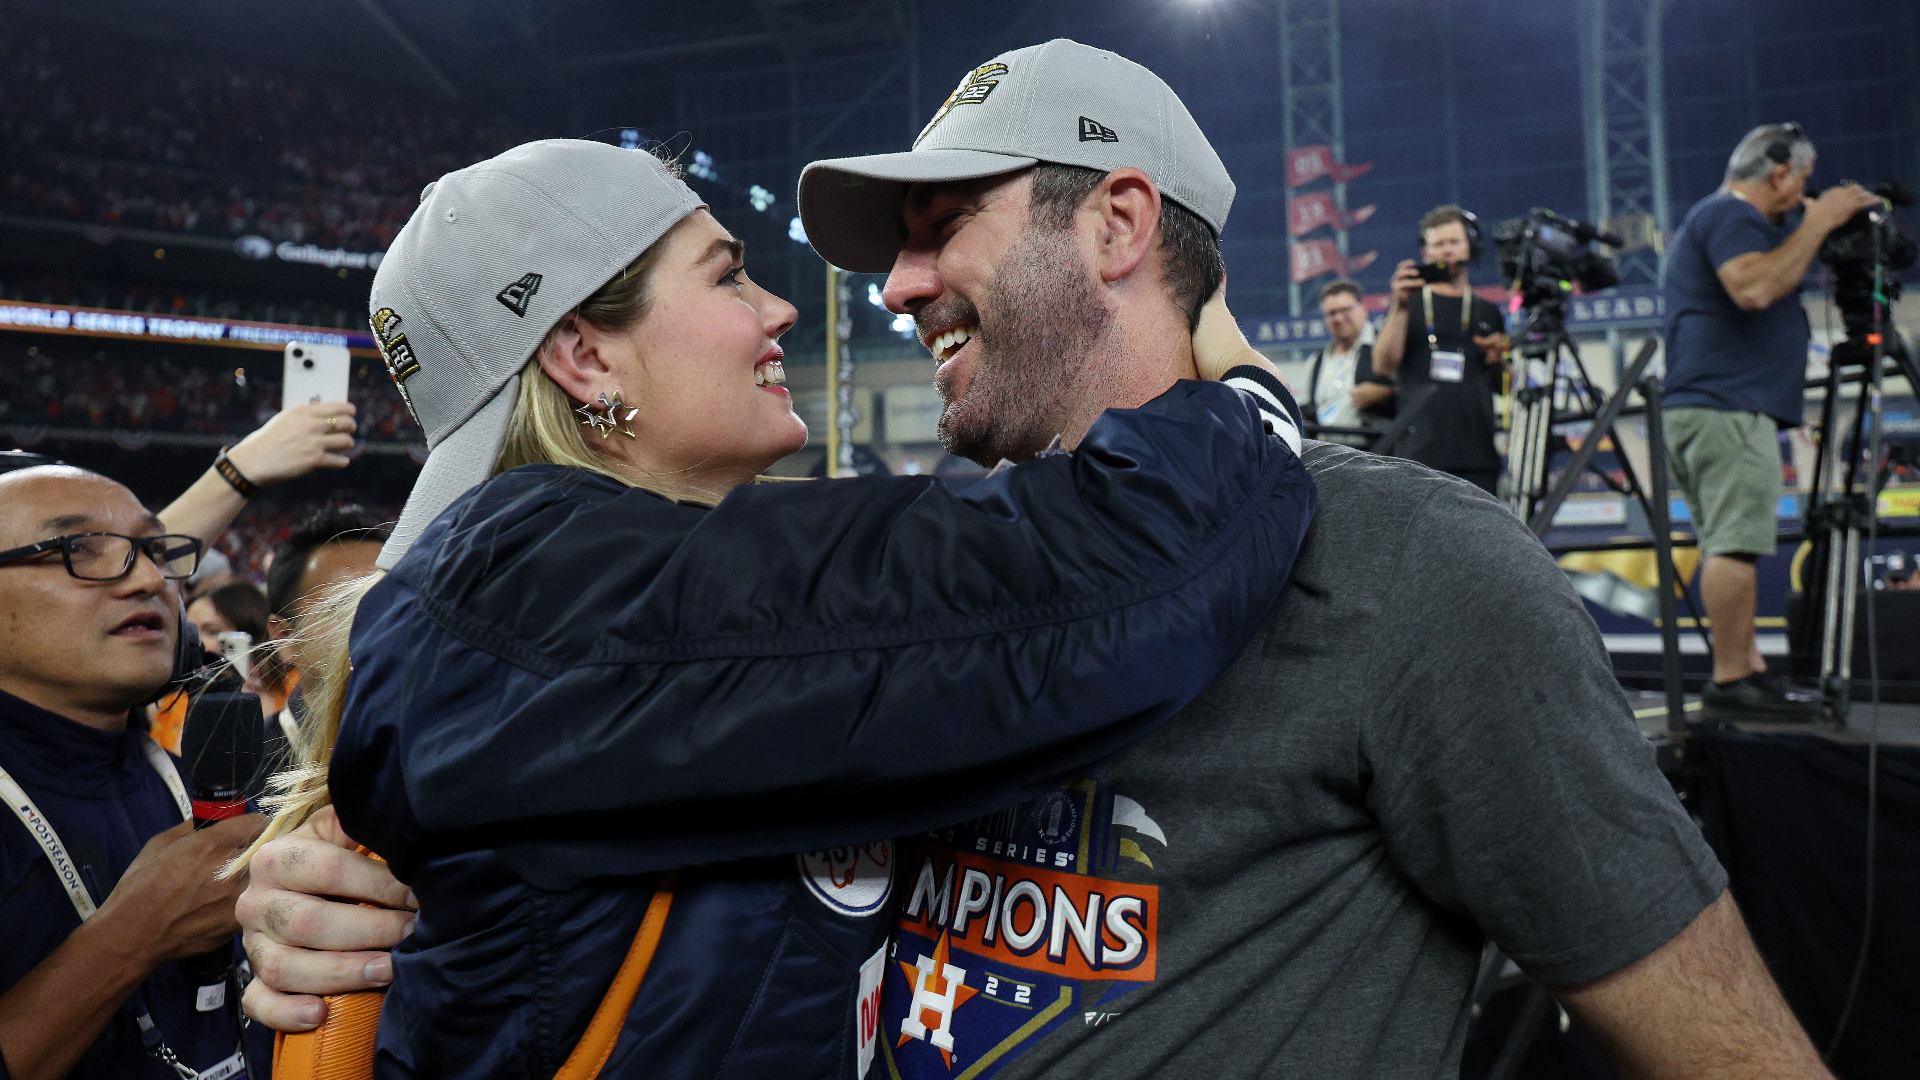 Houston Astros: Meet the wives and girlfriends of the players